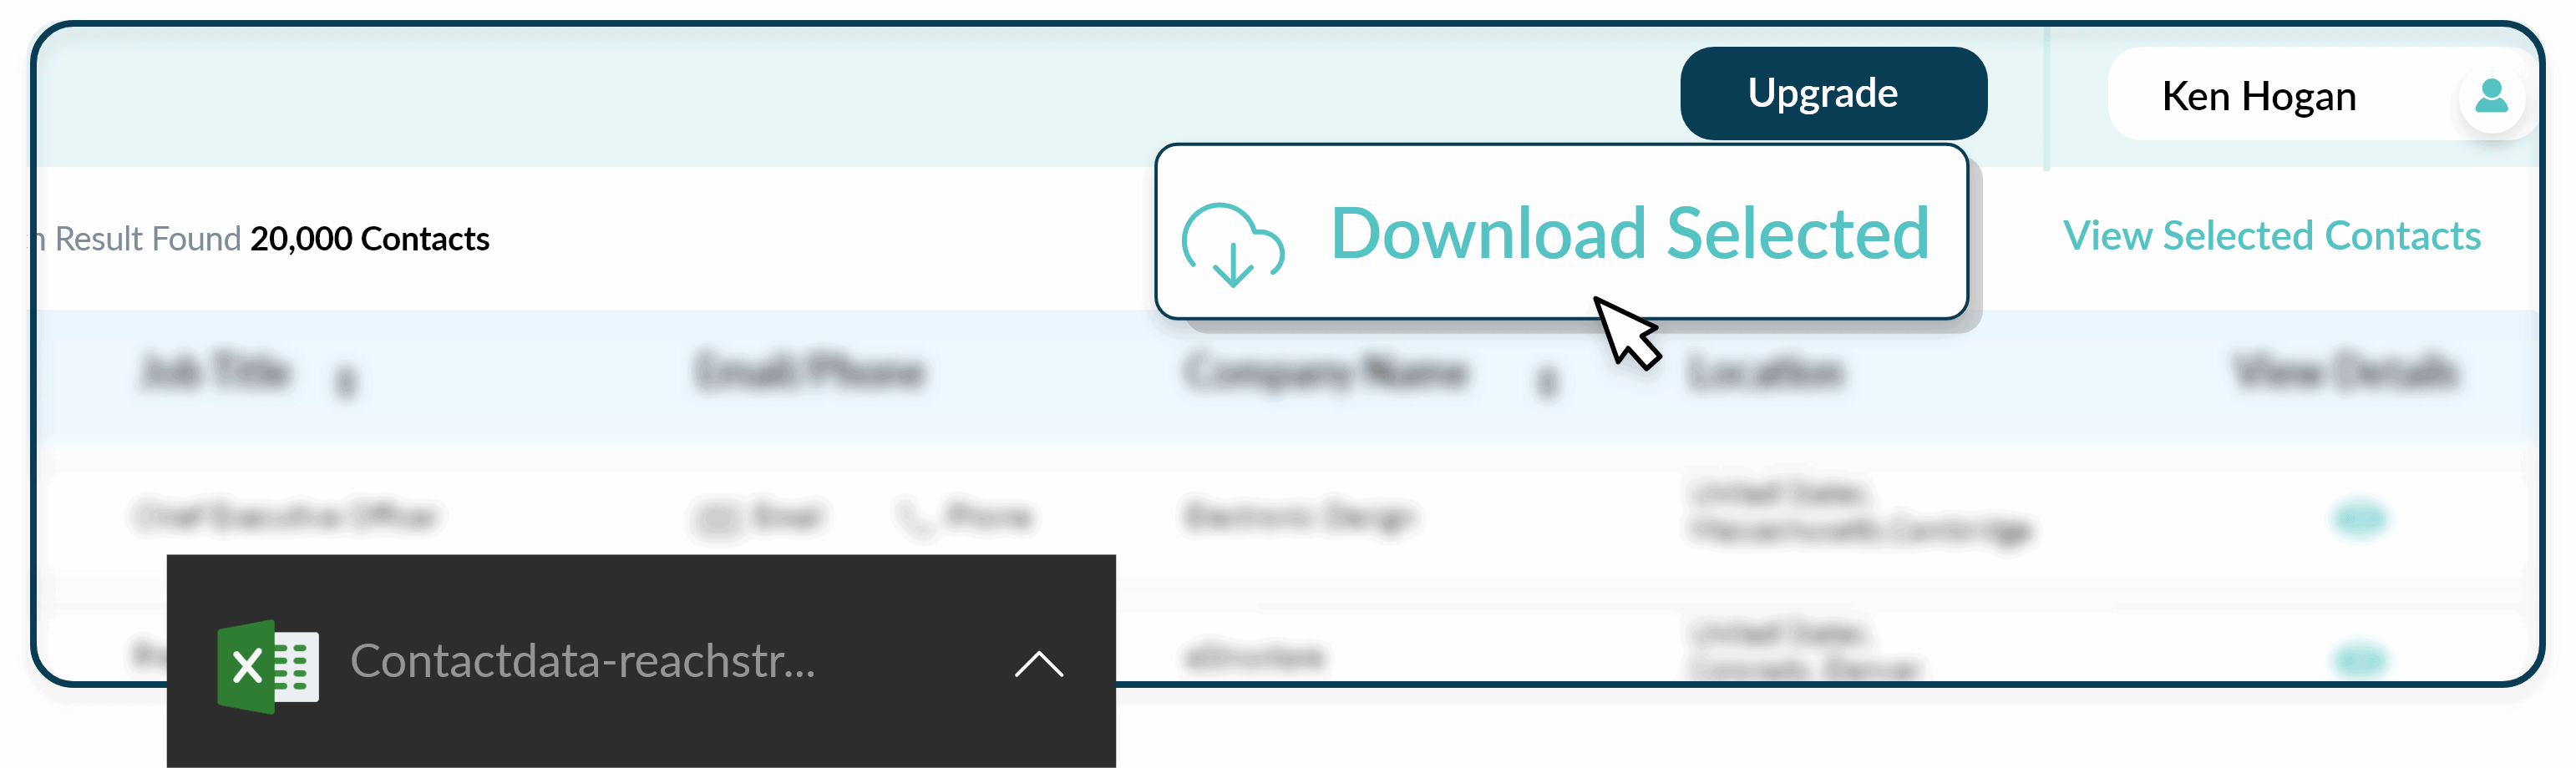 Download Selected